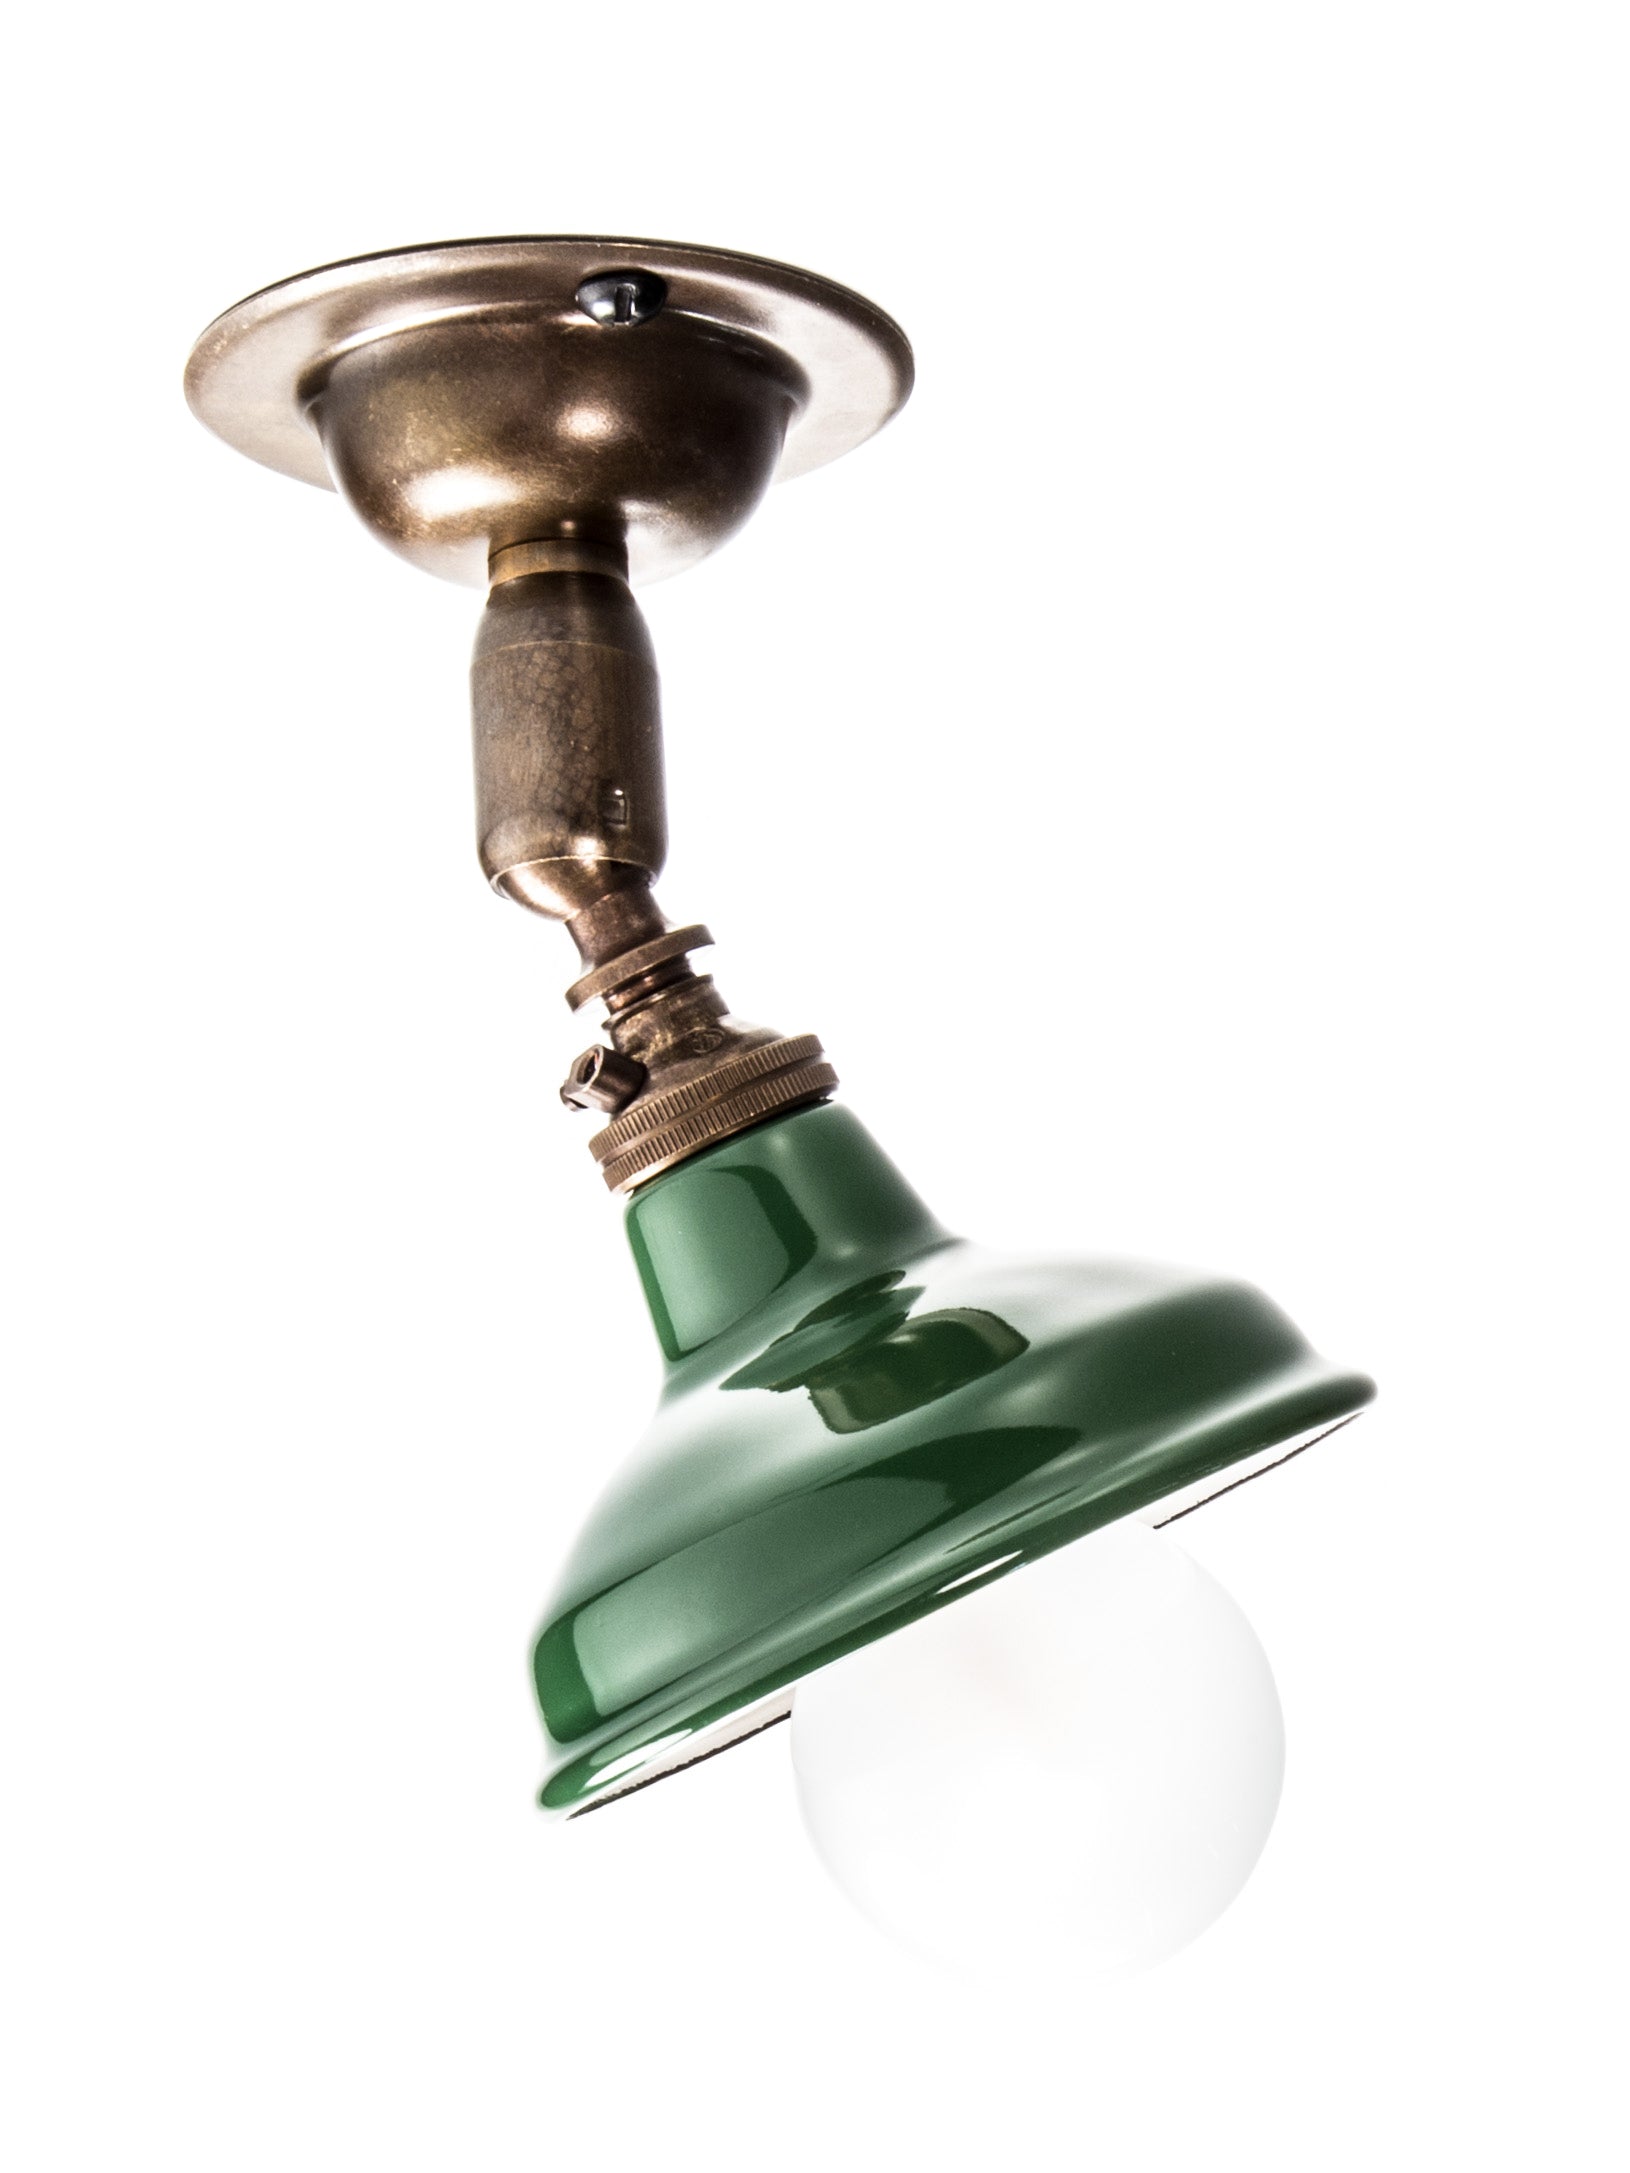 Vintage Brass Maria Spotlight | Ceiling Light With Green Shade | End-Of-Line